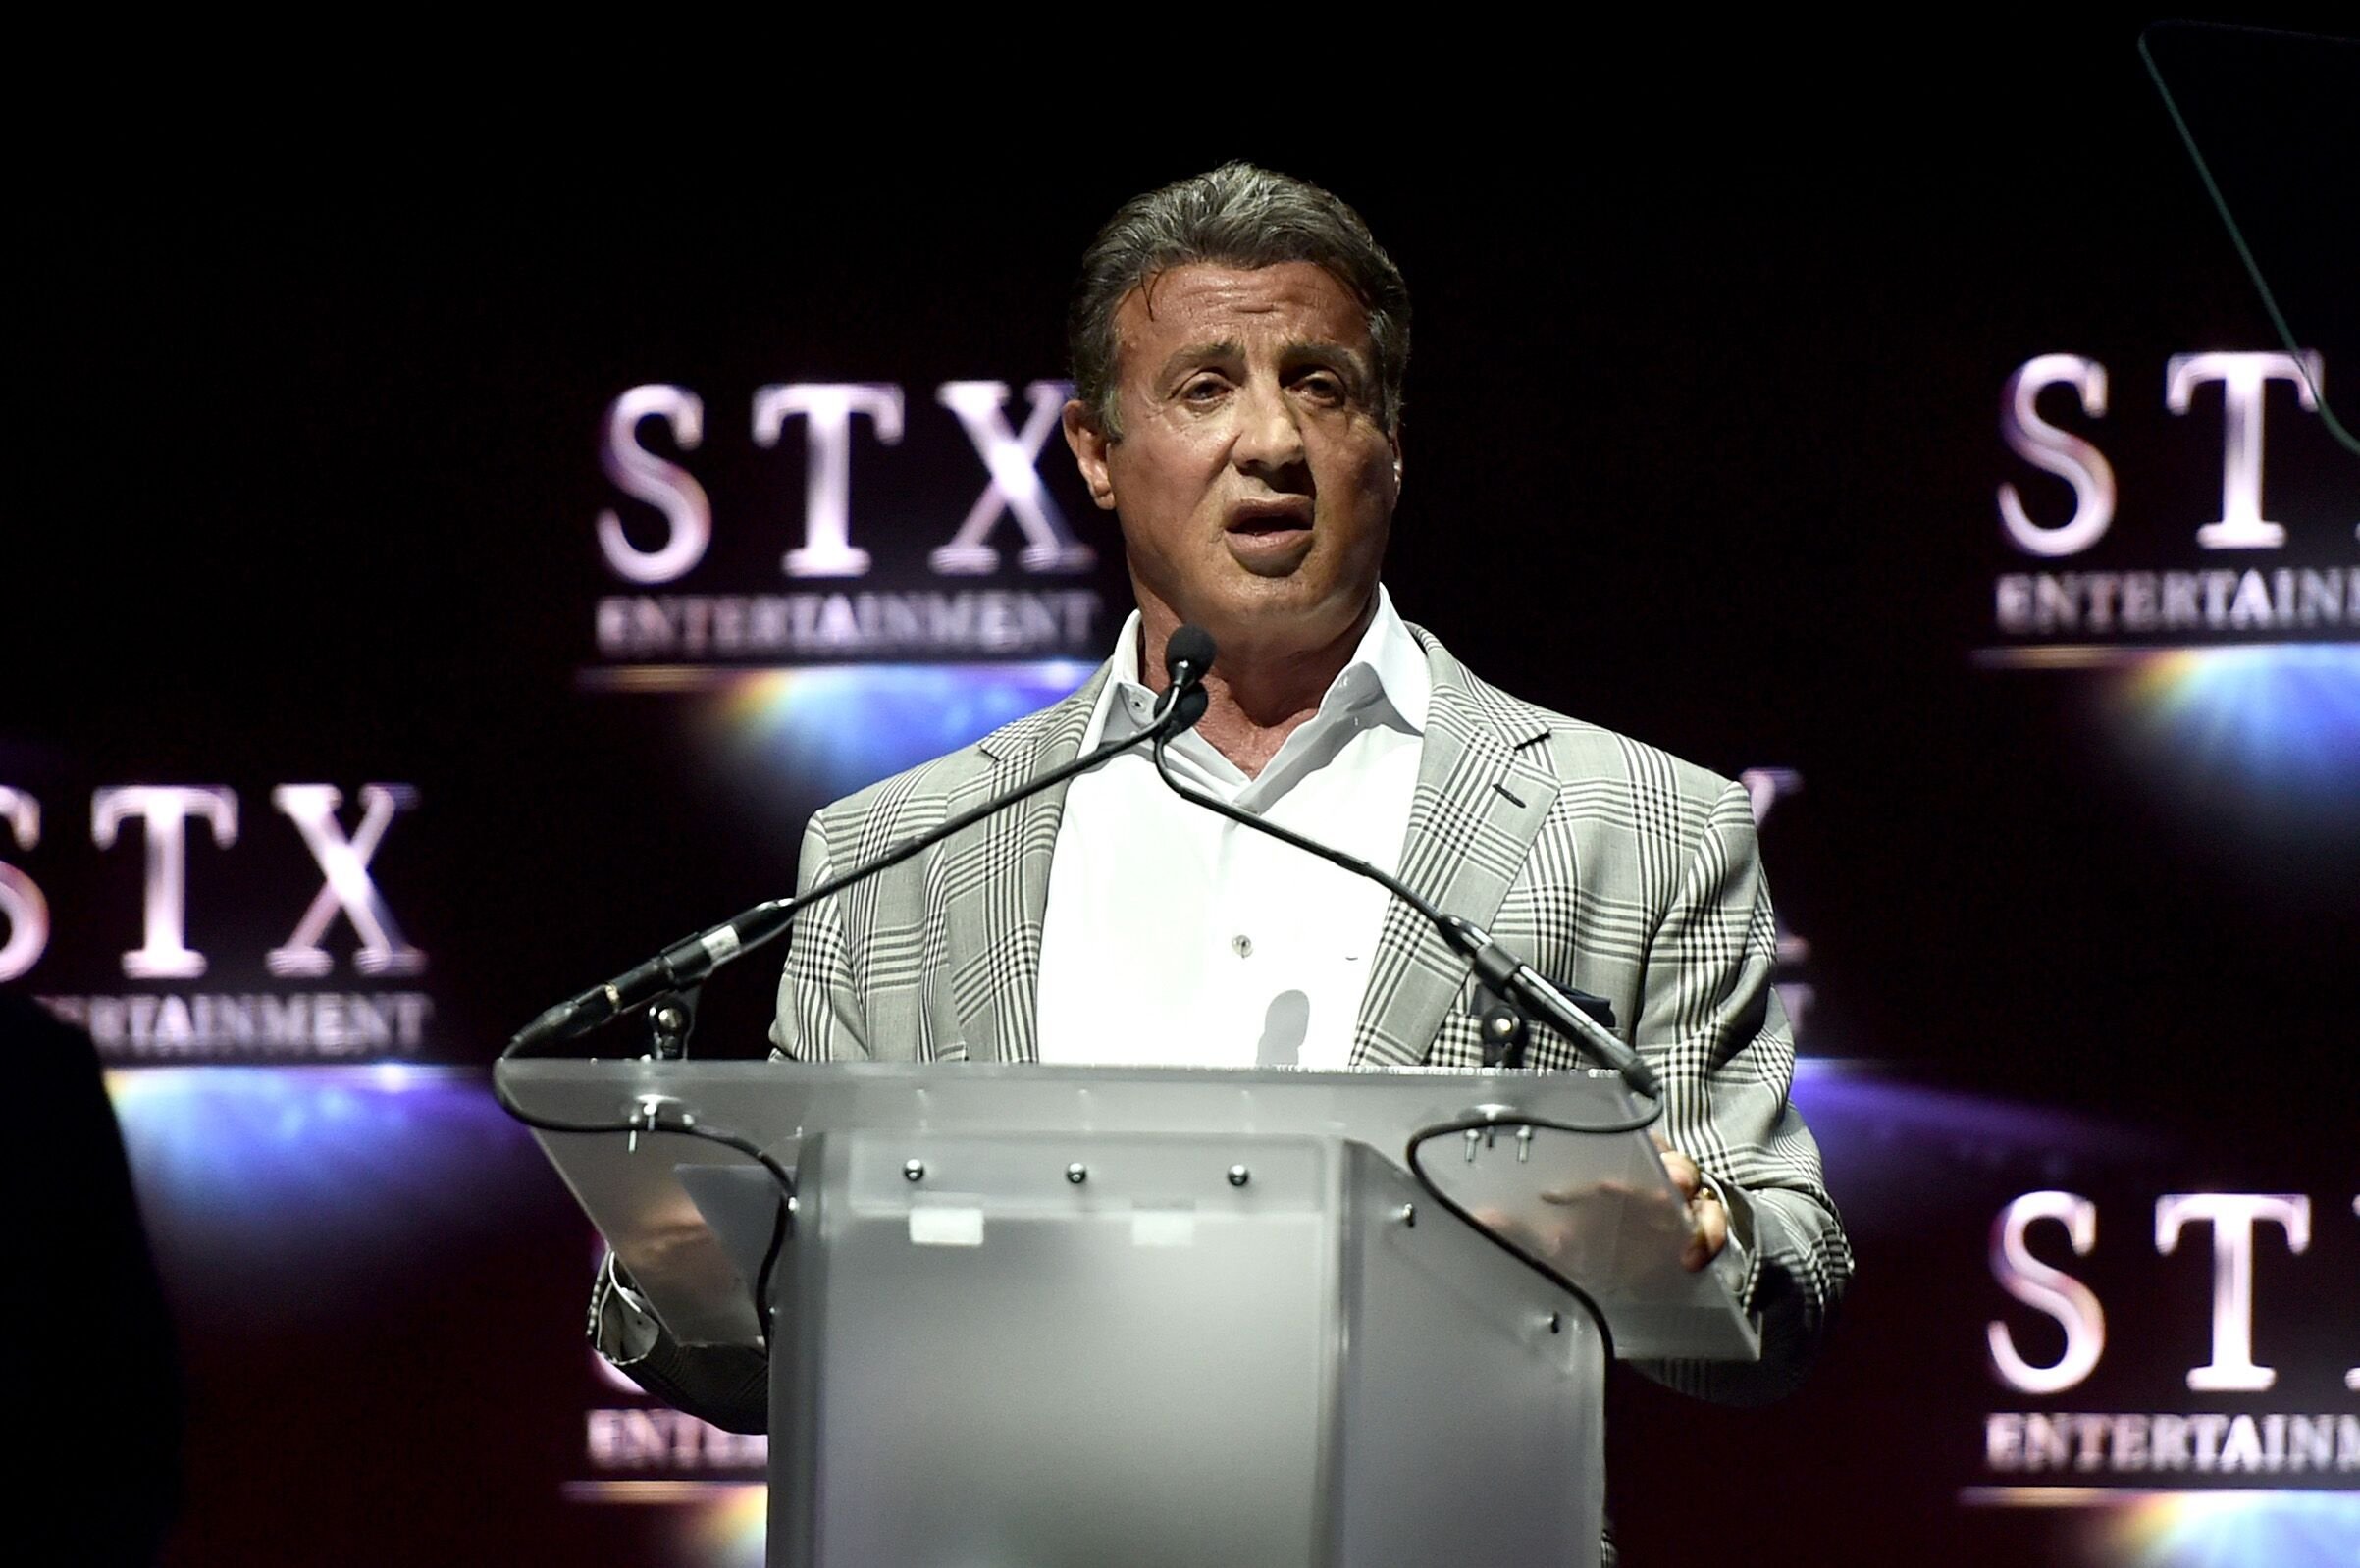 Sylvester Stallone speaks onstage at CinemaCon, the official convention of the National Association of Theatre Owners, on April, 12, 2016 in Las Vegas, Nevada | Photo: Getty Images